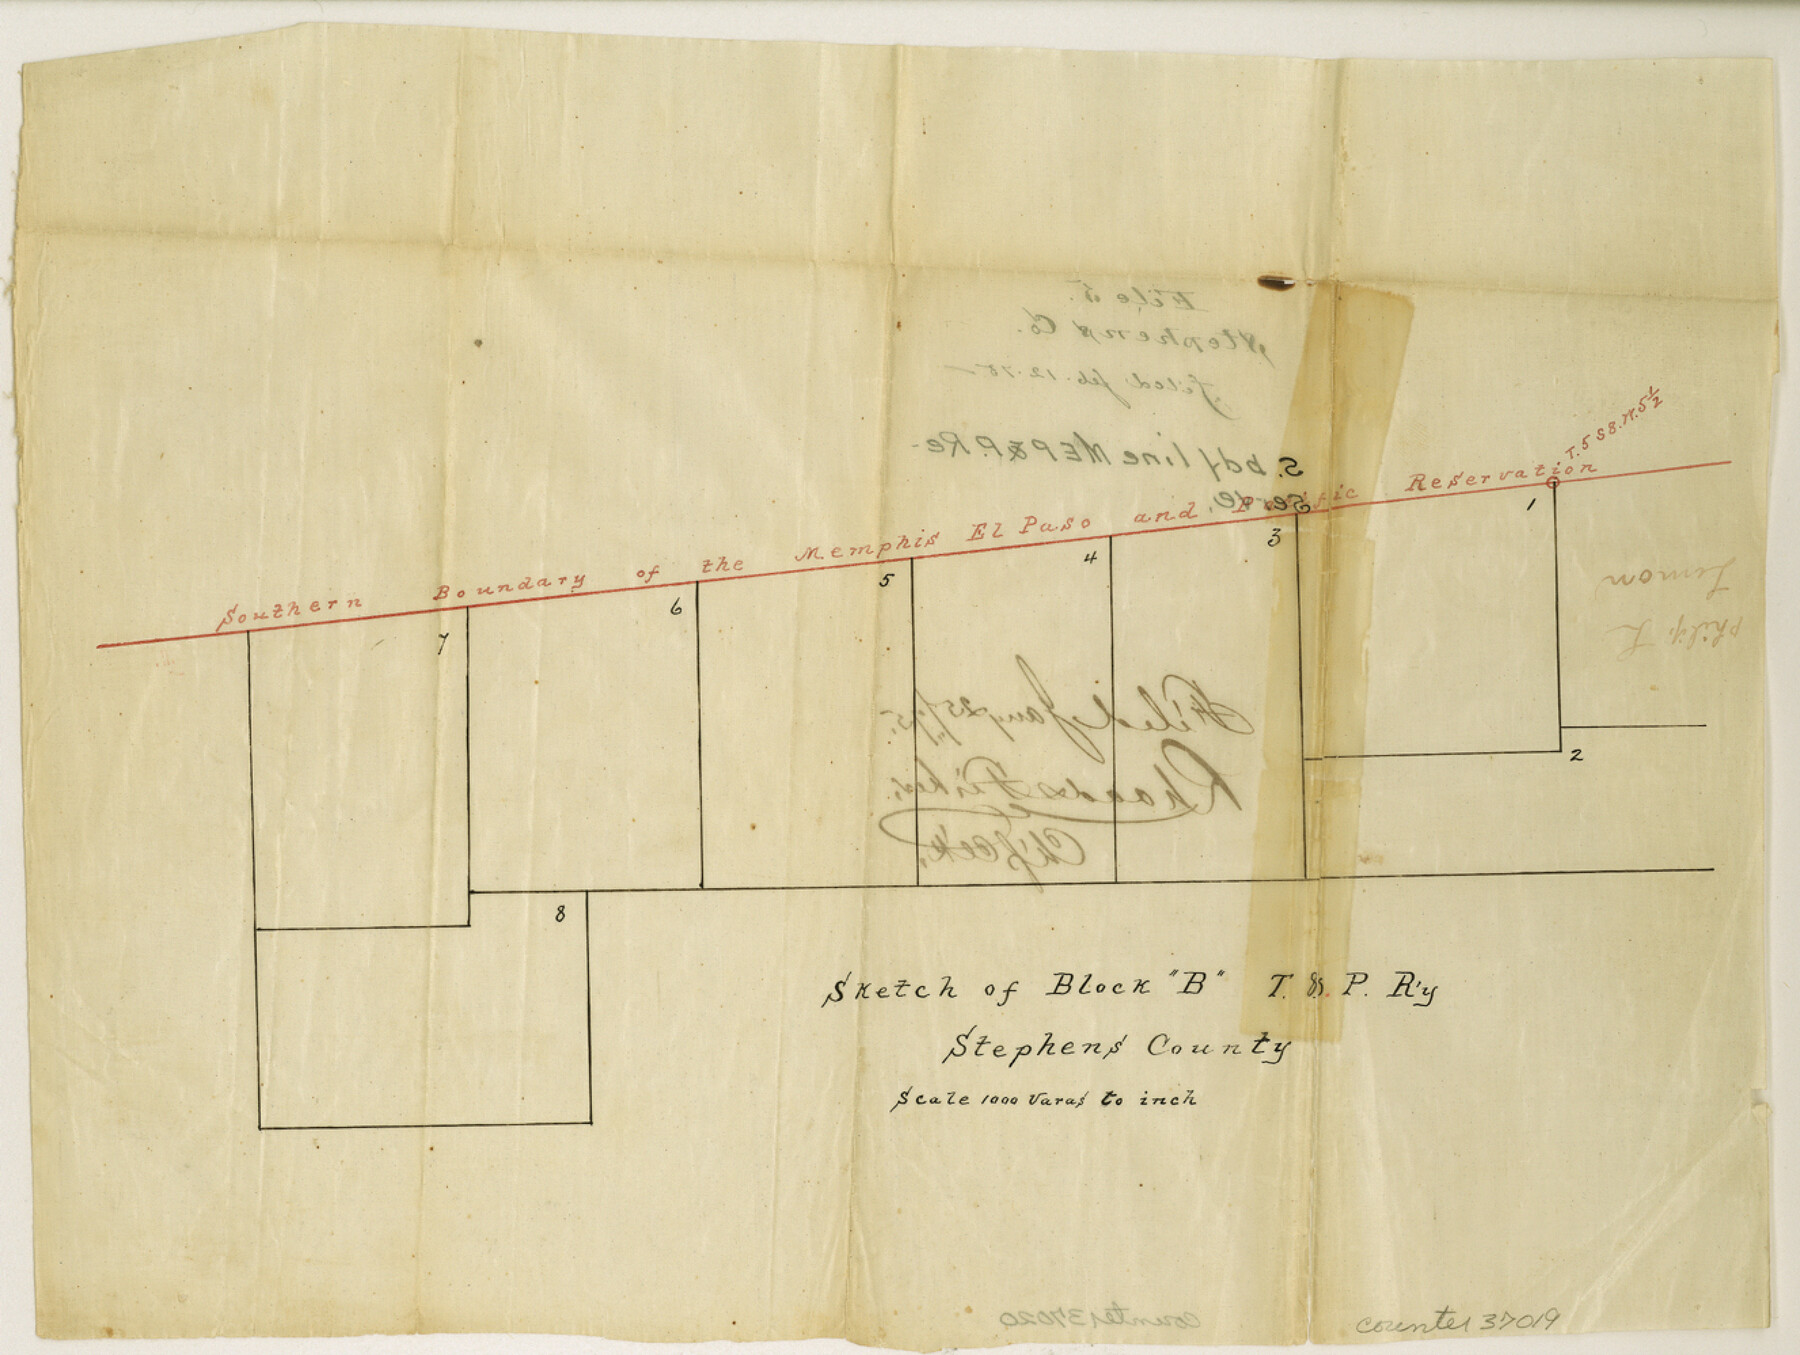 37019, Stephens County Sketch File 5, General Map Collection